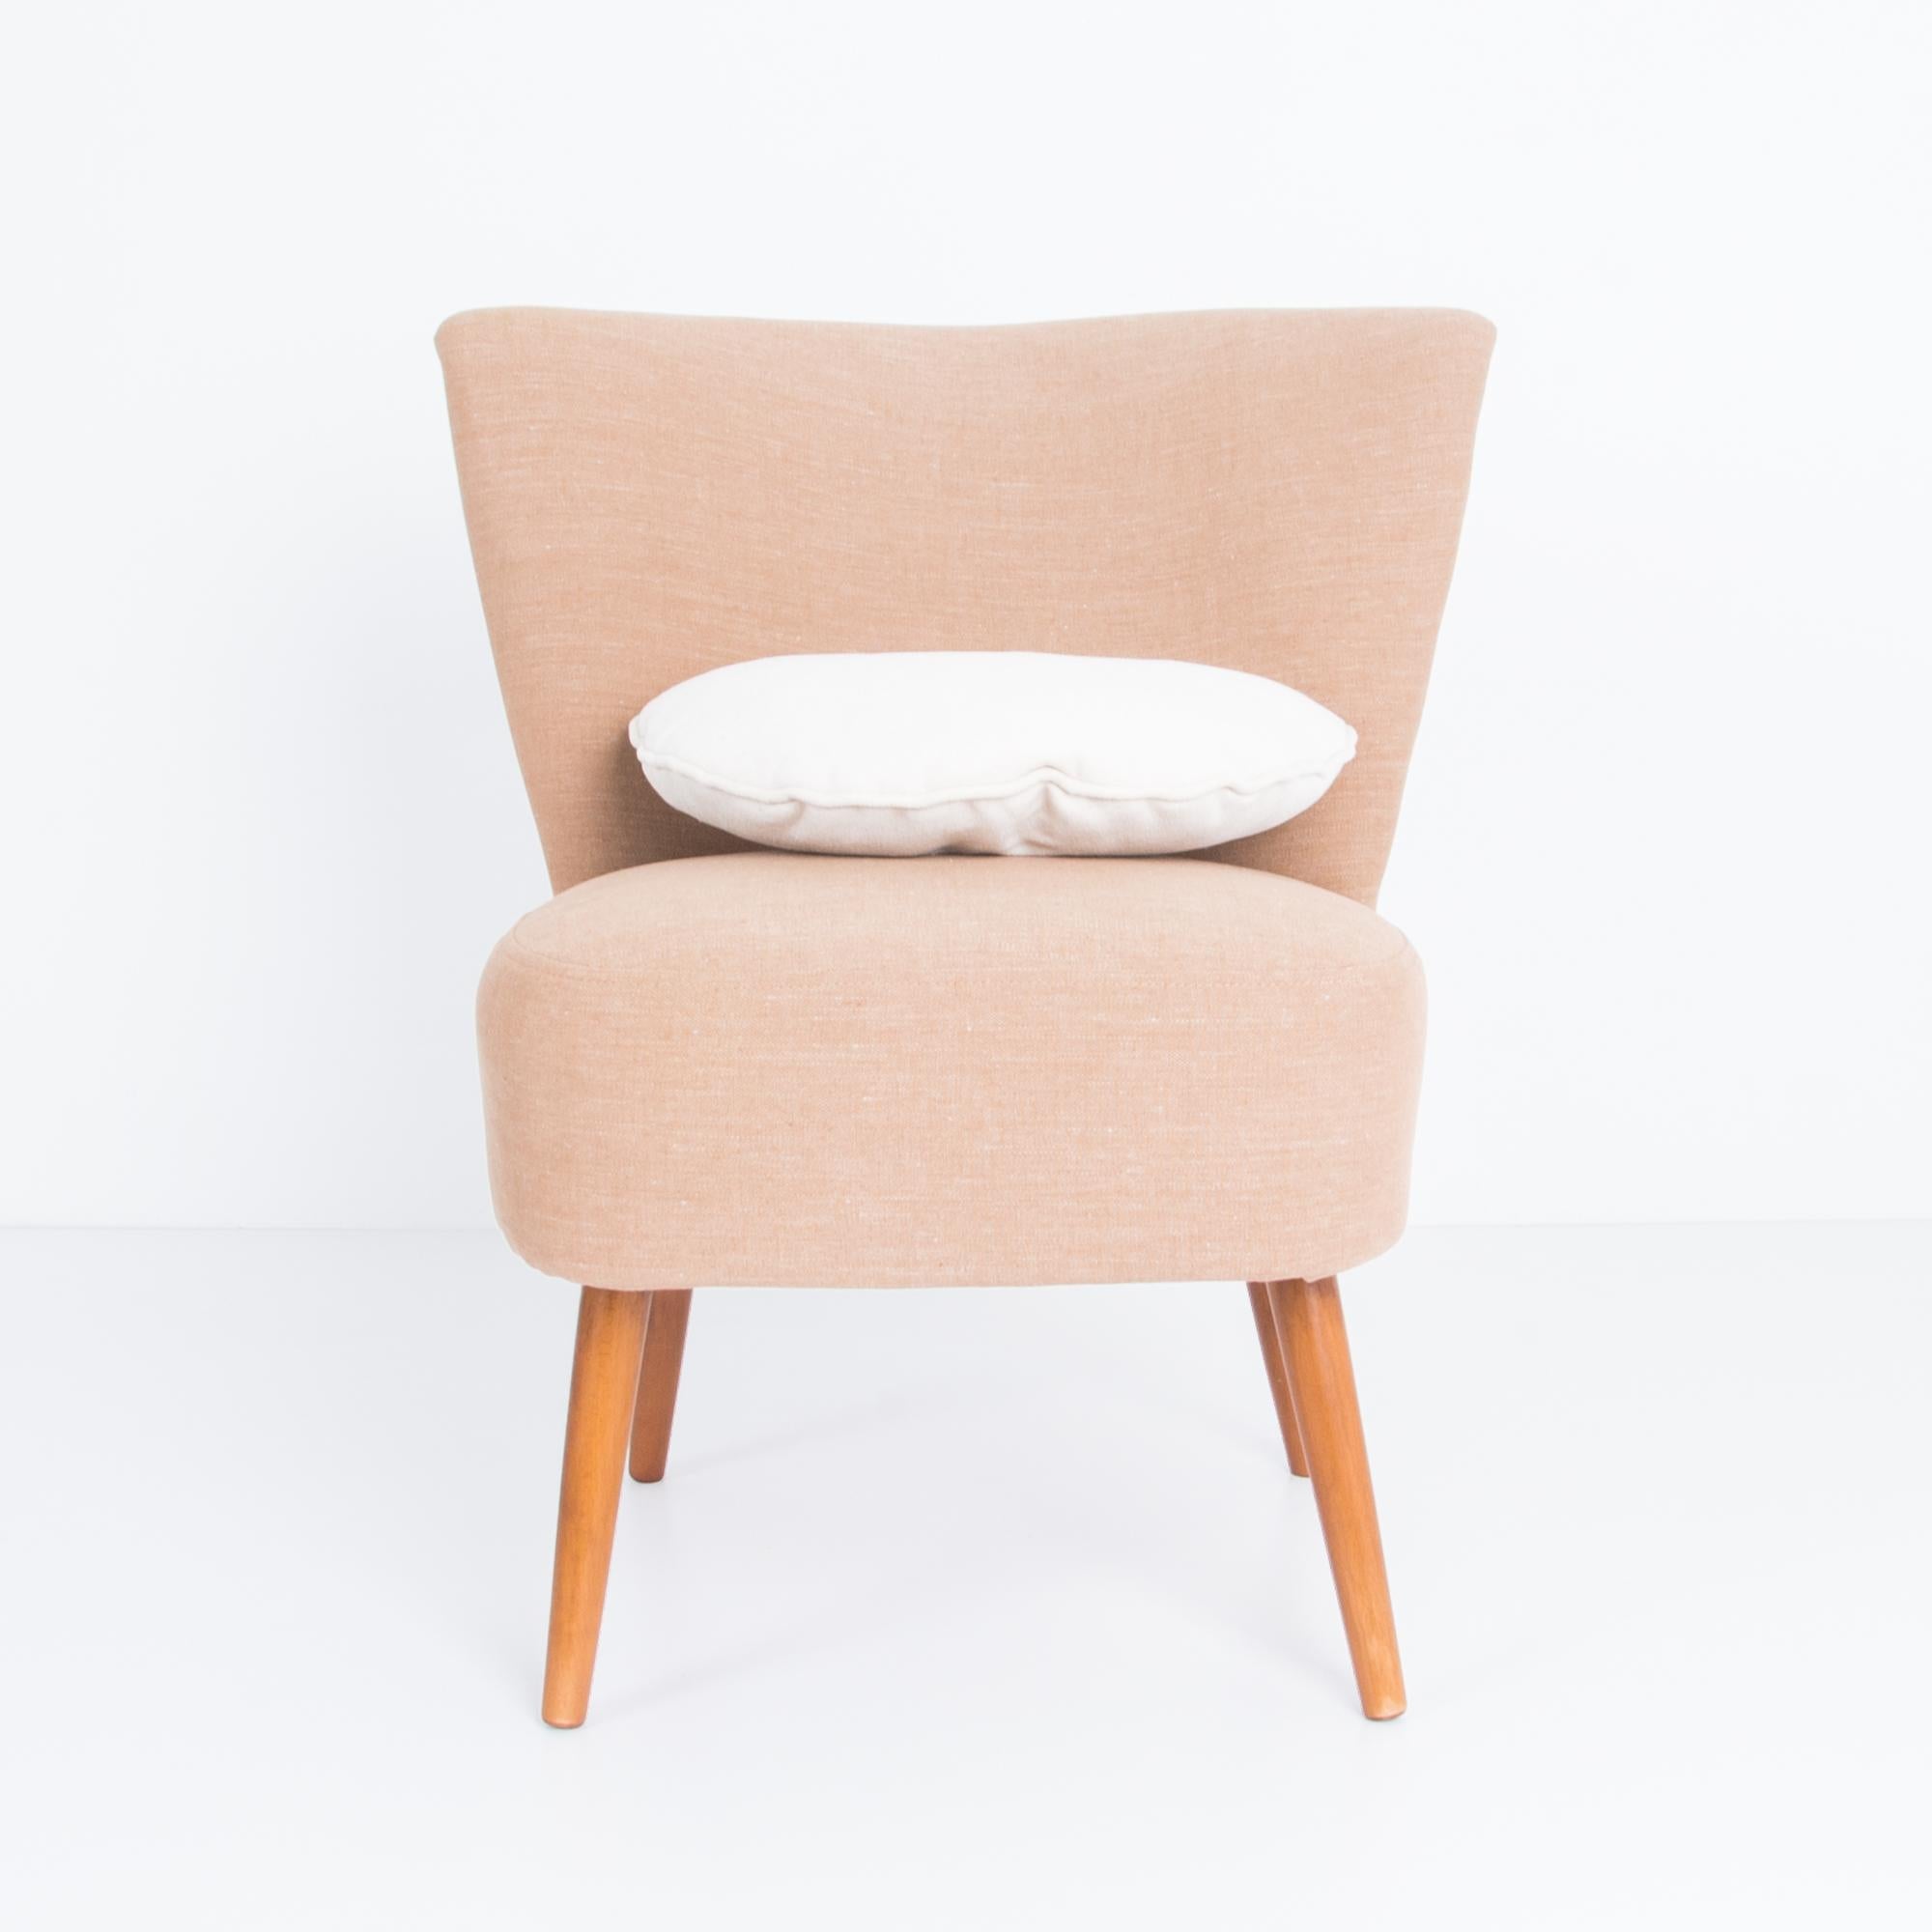 A Mid-Century Modern upholstered side chair from France. This 1960s vintage design has a gentle geometric motif. The chic tapered seat back gives a bold motif, balanced by angled wooden legs. Updated cotton-linen upholstery in a warm peachy hue,